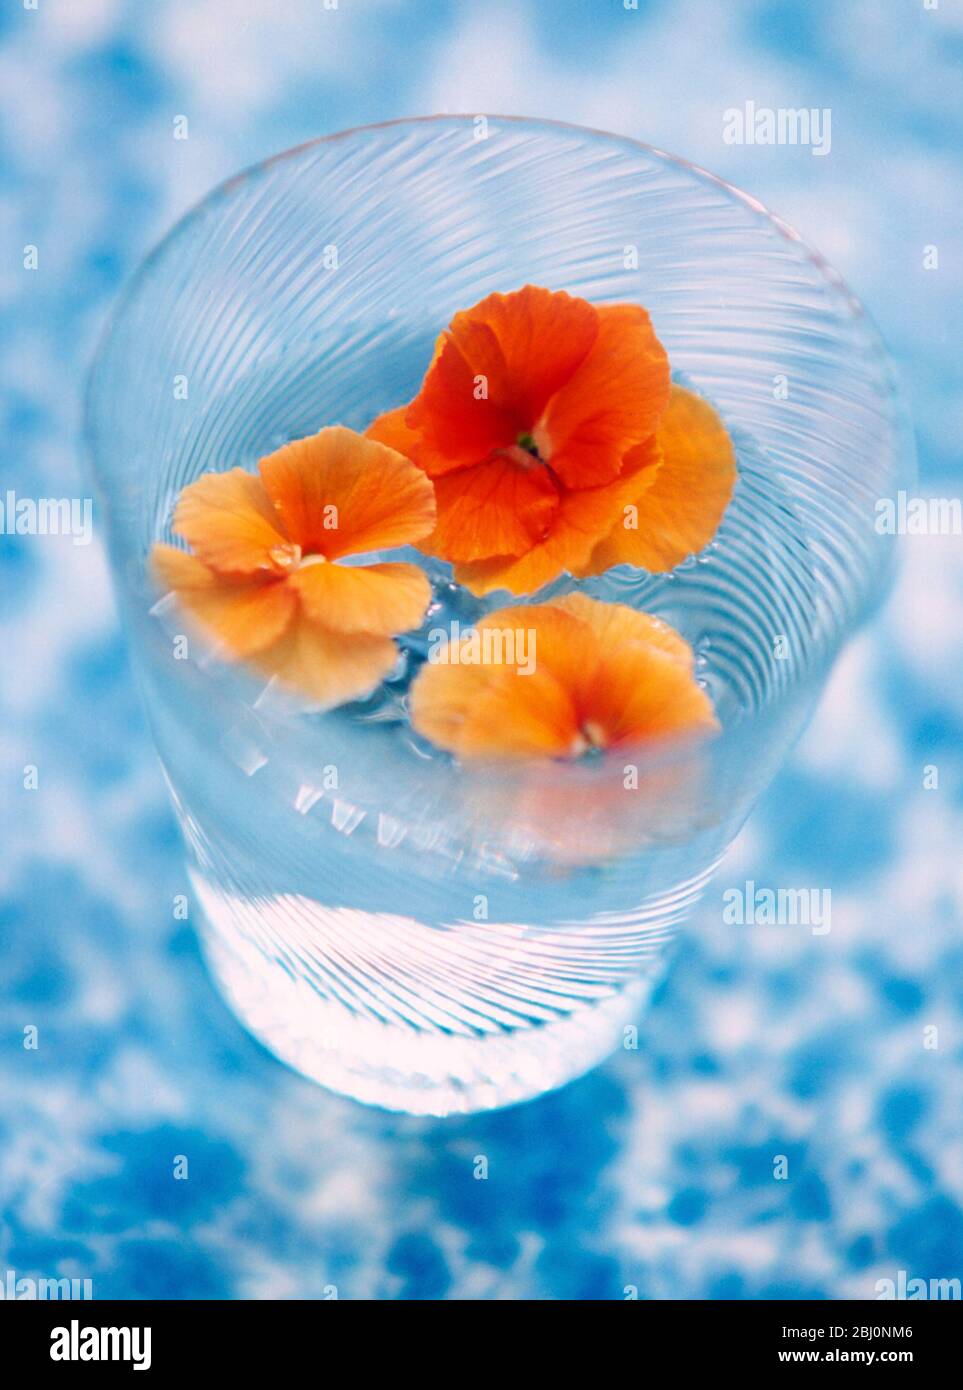 Orange coloured pansy heads floating in water in fine glass tumbler on mottled bue and white surface - Stock Photo